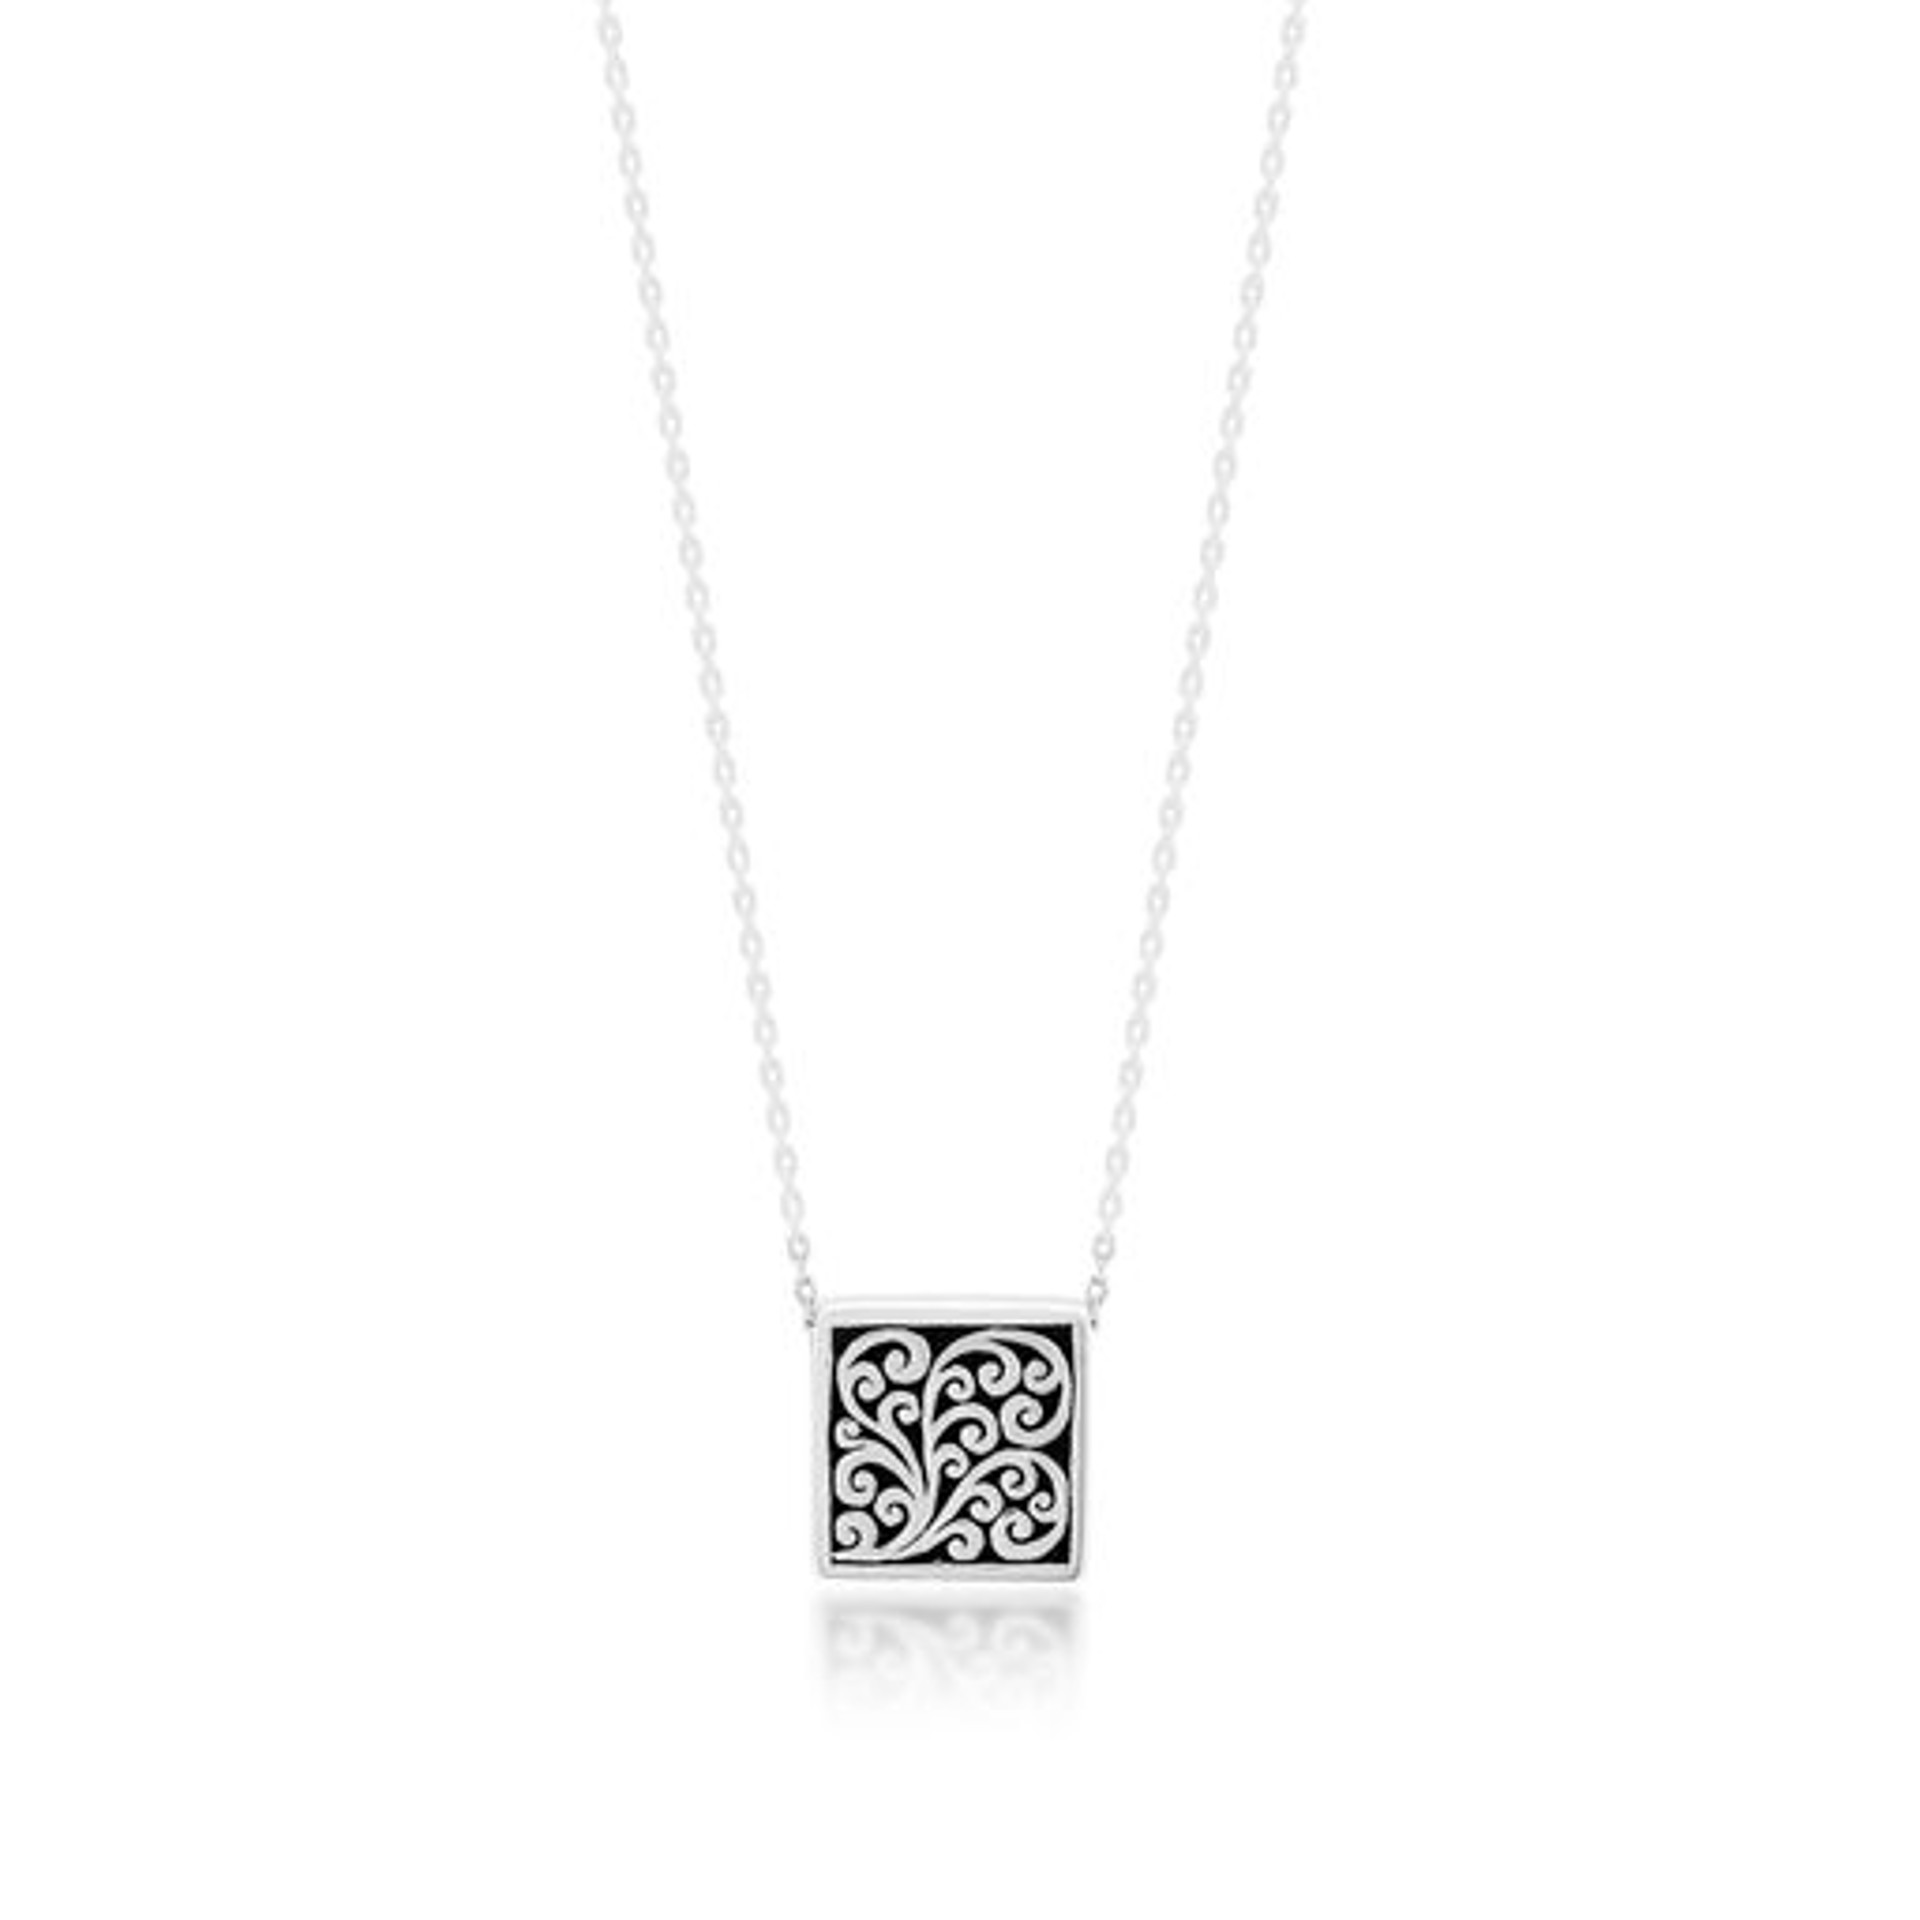 6985 Signature Scroll Square Pendant Necklace by Lois Hill